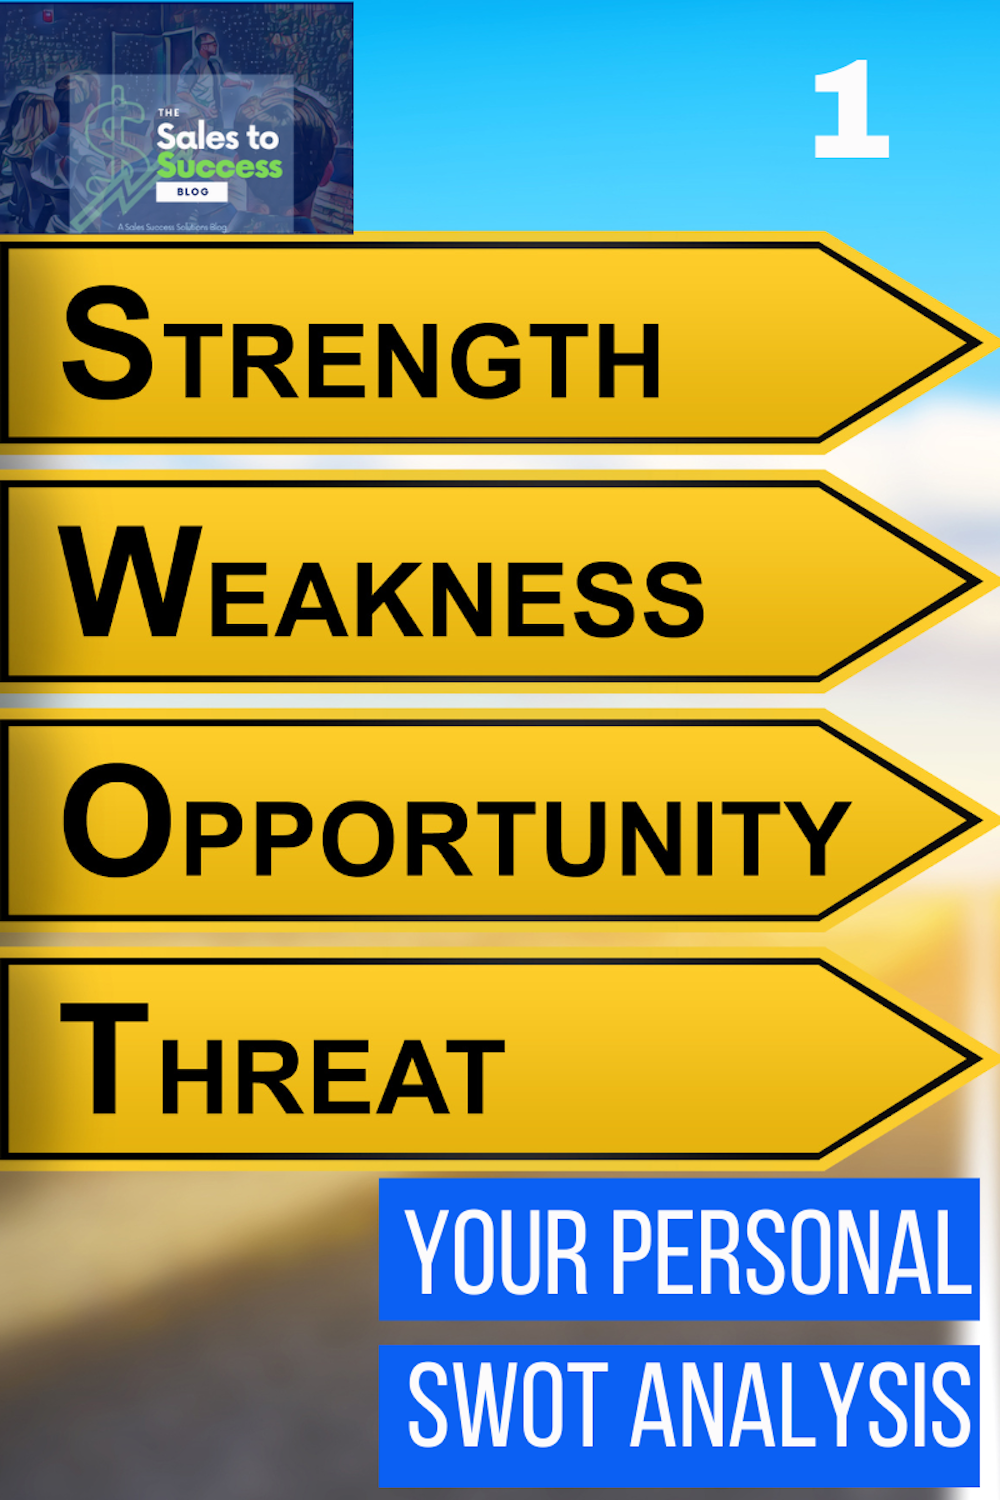 Your Personal SWOT Analysis!